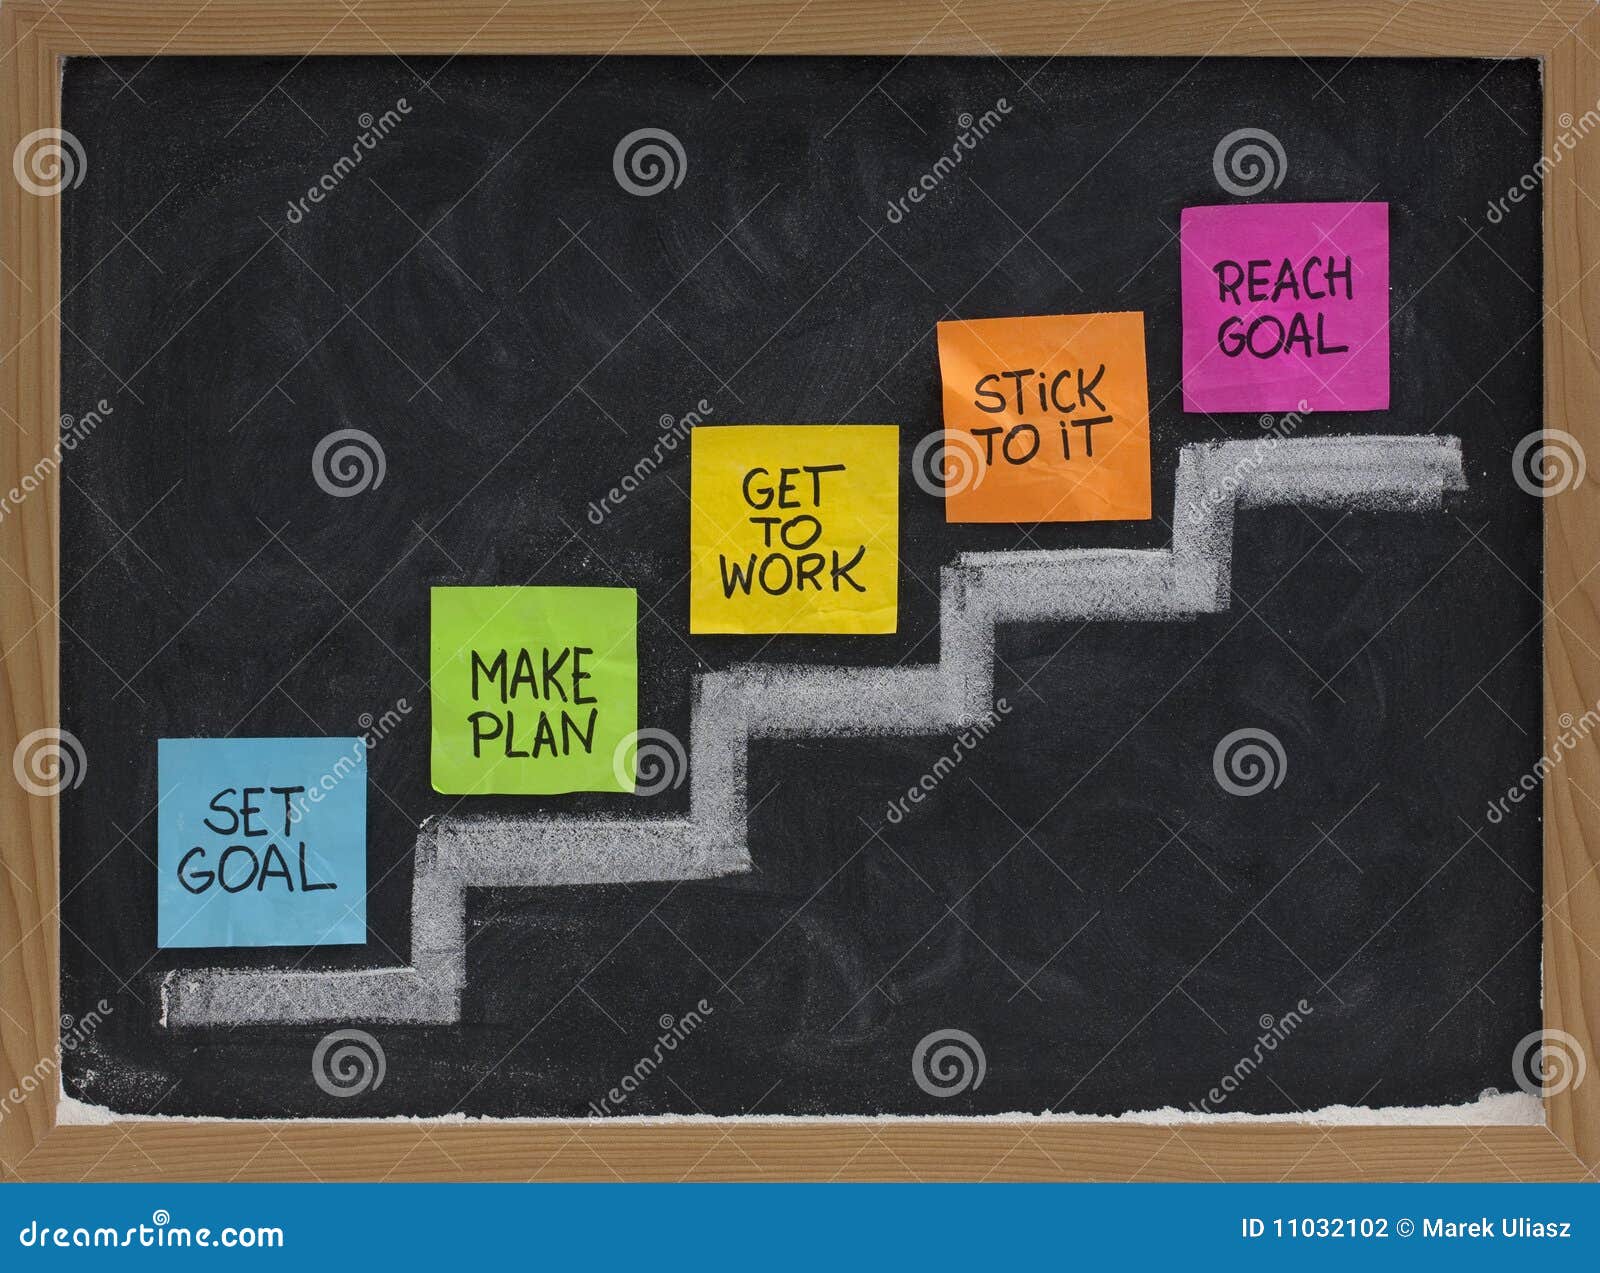 Set And Reach Goal Concept Stock Photography - Image: 11032102